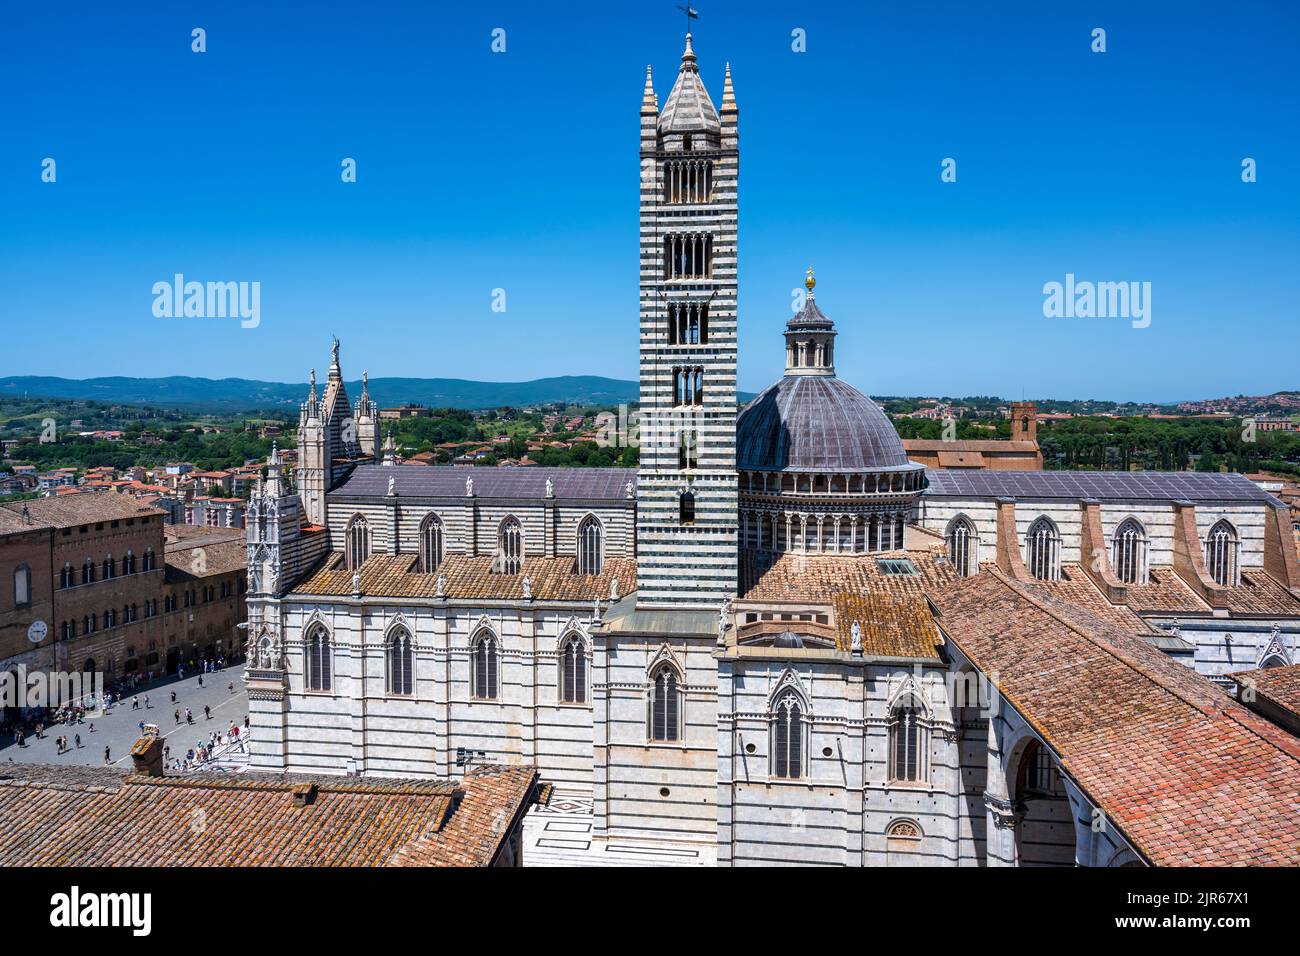 View of Duomo di Siena (cathedral) and Campanile (bell tower) from Facciatone observation point in Piazza del Duomo in Siena, Tuscany, Italy Stock Photo